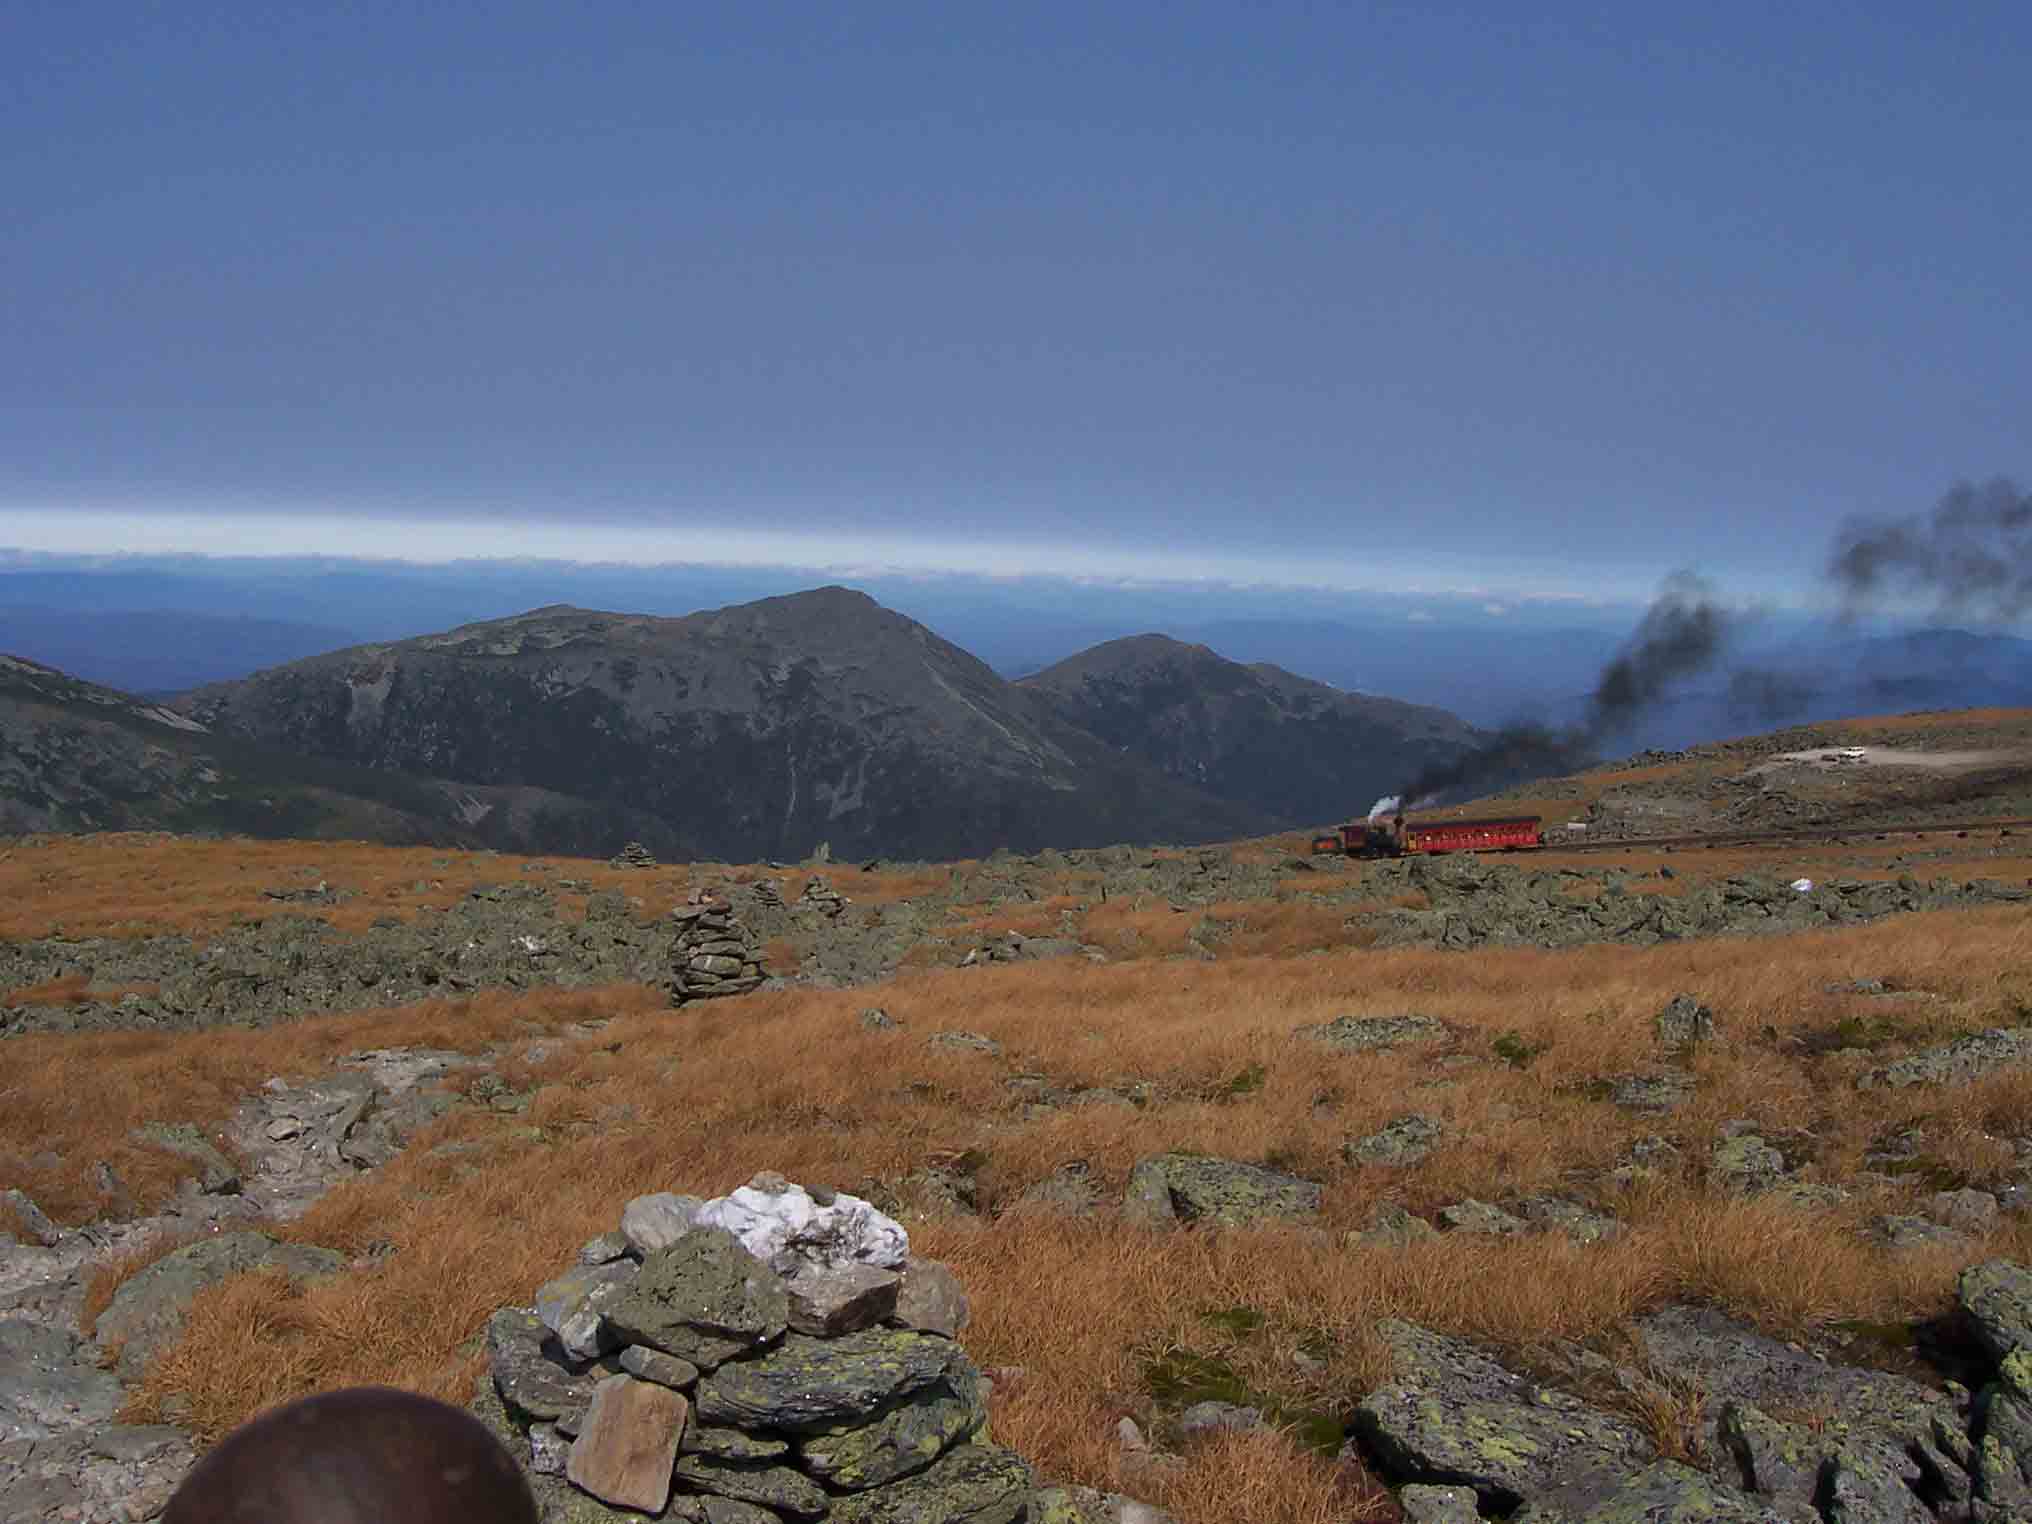 View north from north side of Mt. Washington.  Mts. Adams and Madison are visible. Note cog railway train descending the mountain. Taken from near the junction with the Great Gulf Trail at Mile 13.1.  Courtesy dlcul@conncoll.edu